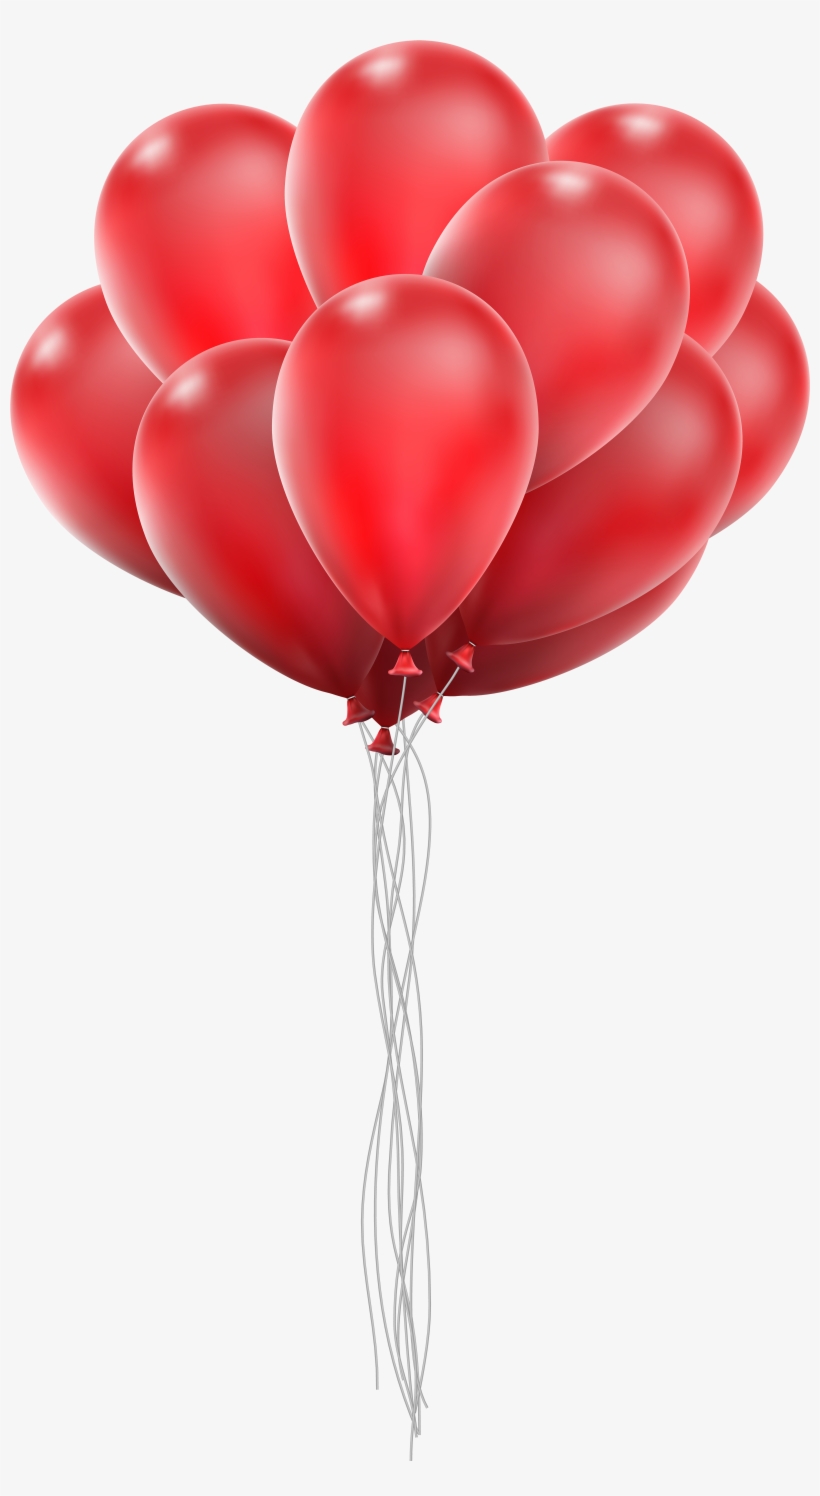 Balloon Bunch Png Clip Art Image - Red Balloon Png, transparent png #3143463